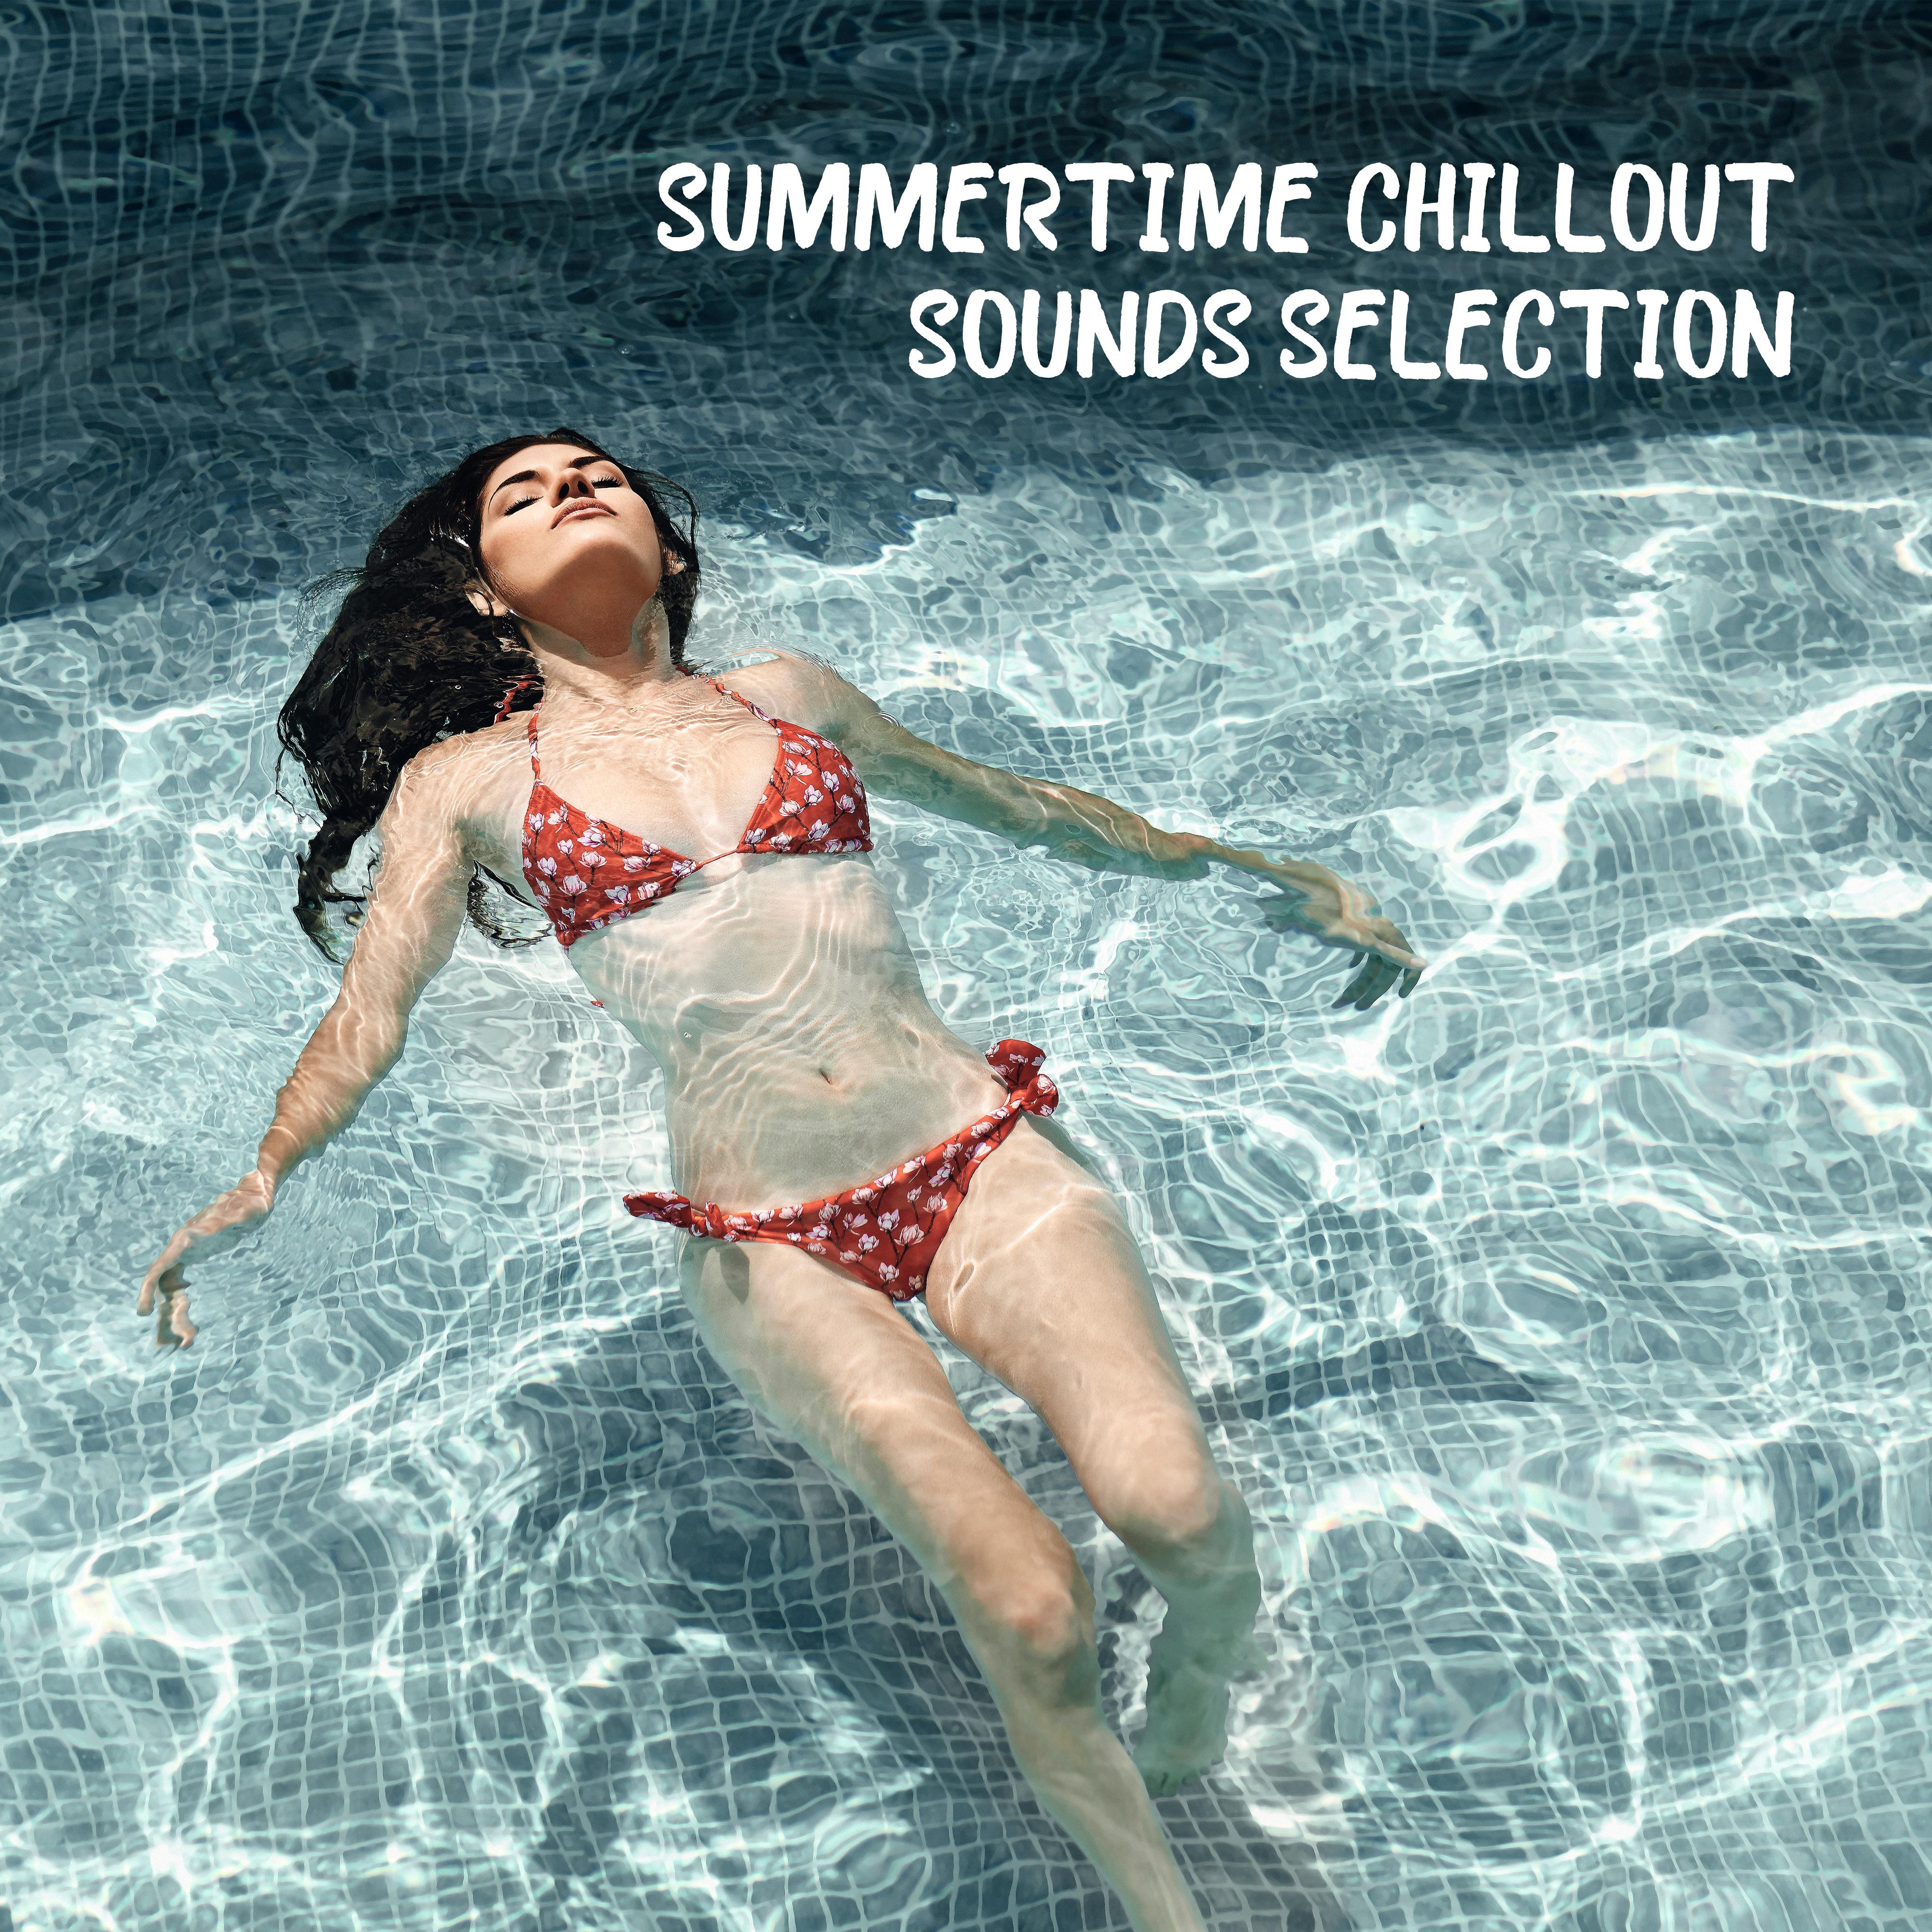 Summertime Chillout Sounds Selection: 2019 Chill Out Music Compilation, Total Relax Under the Palms, Ibiza Chill, Ambient Songs